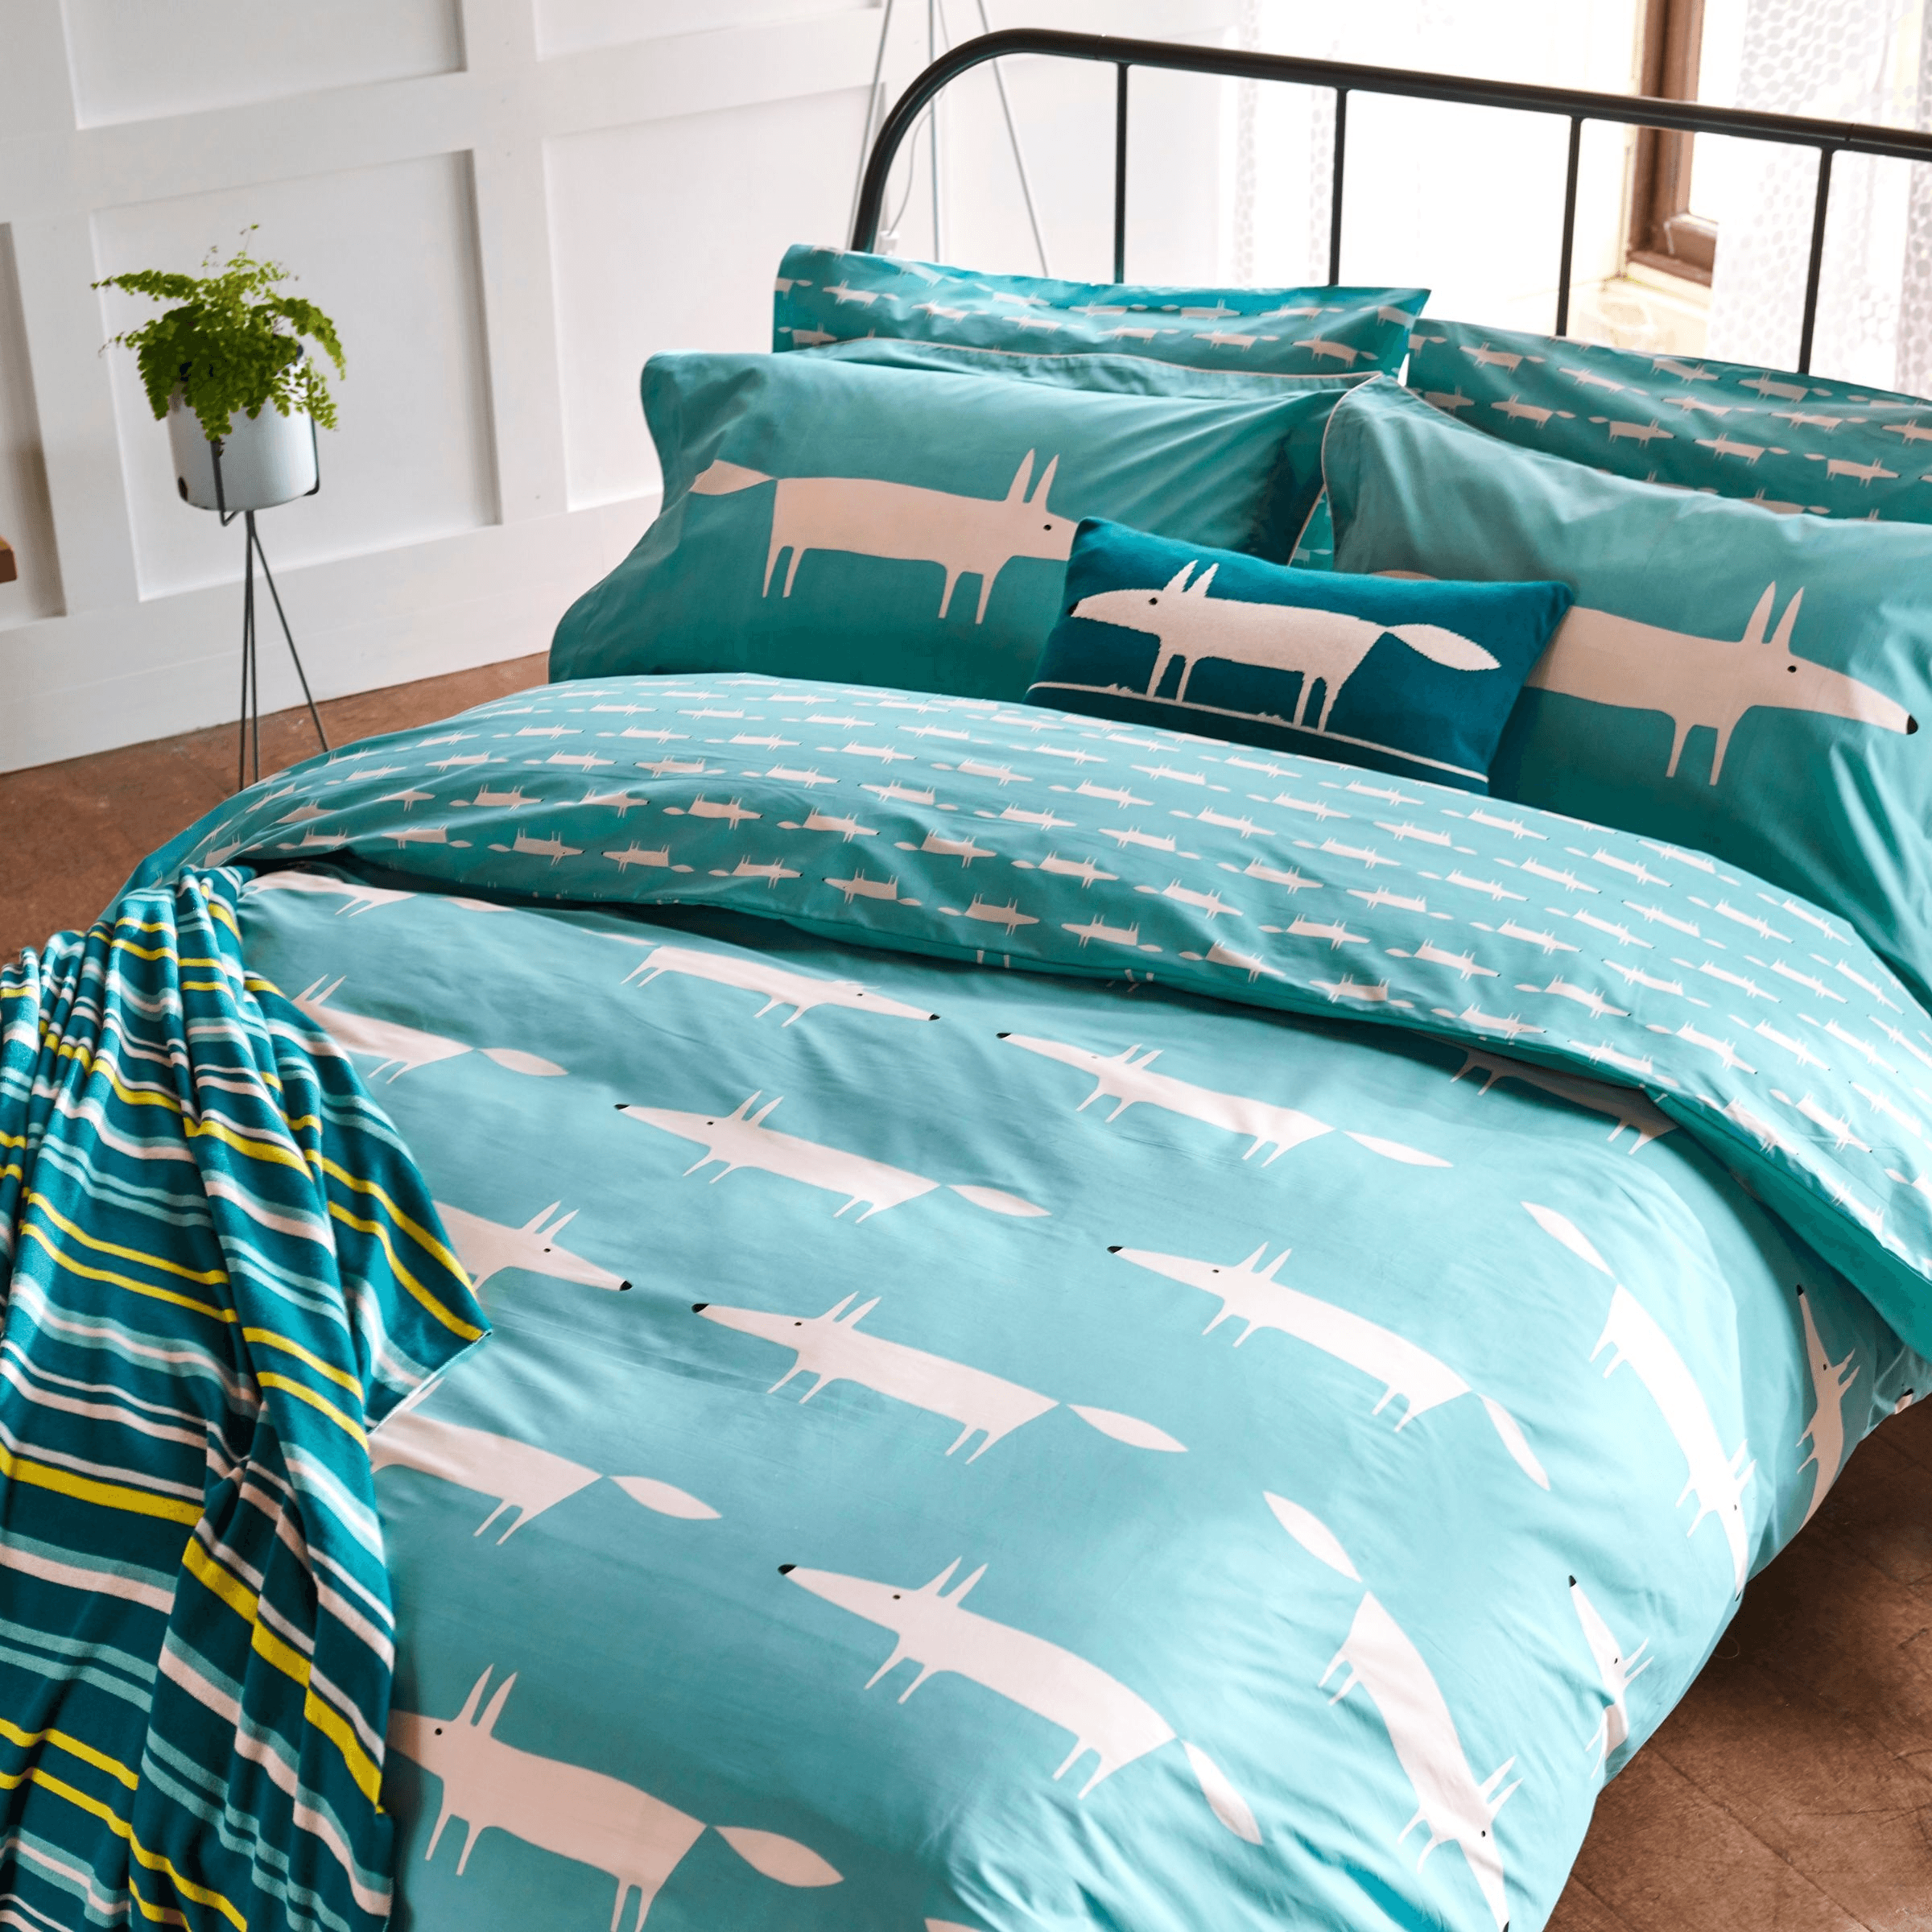 Mr Fox Duvet Cover In Teal Bedding By Scion